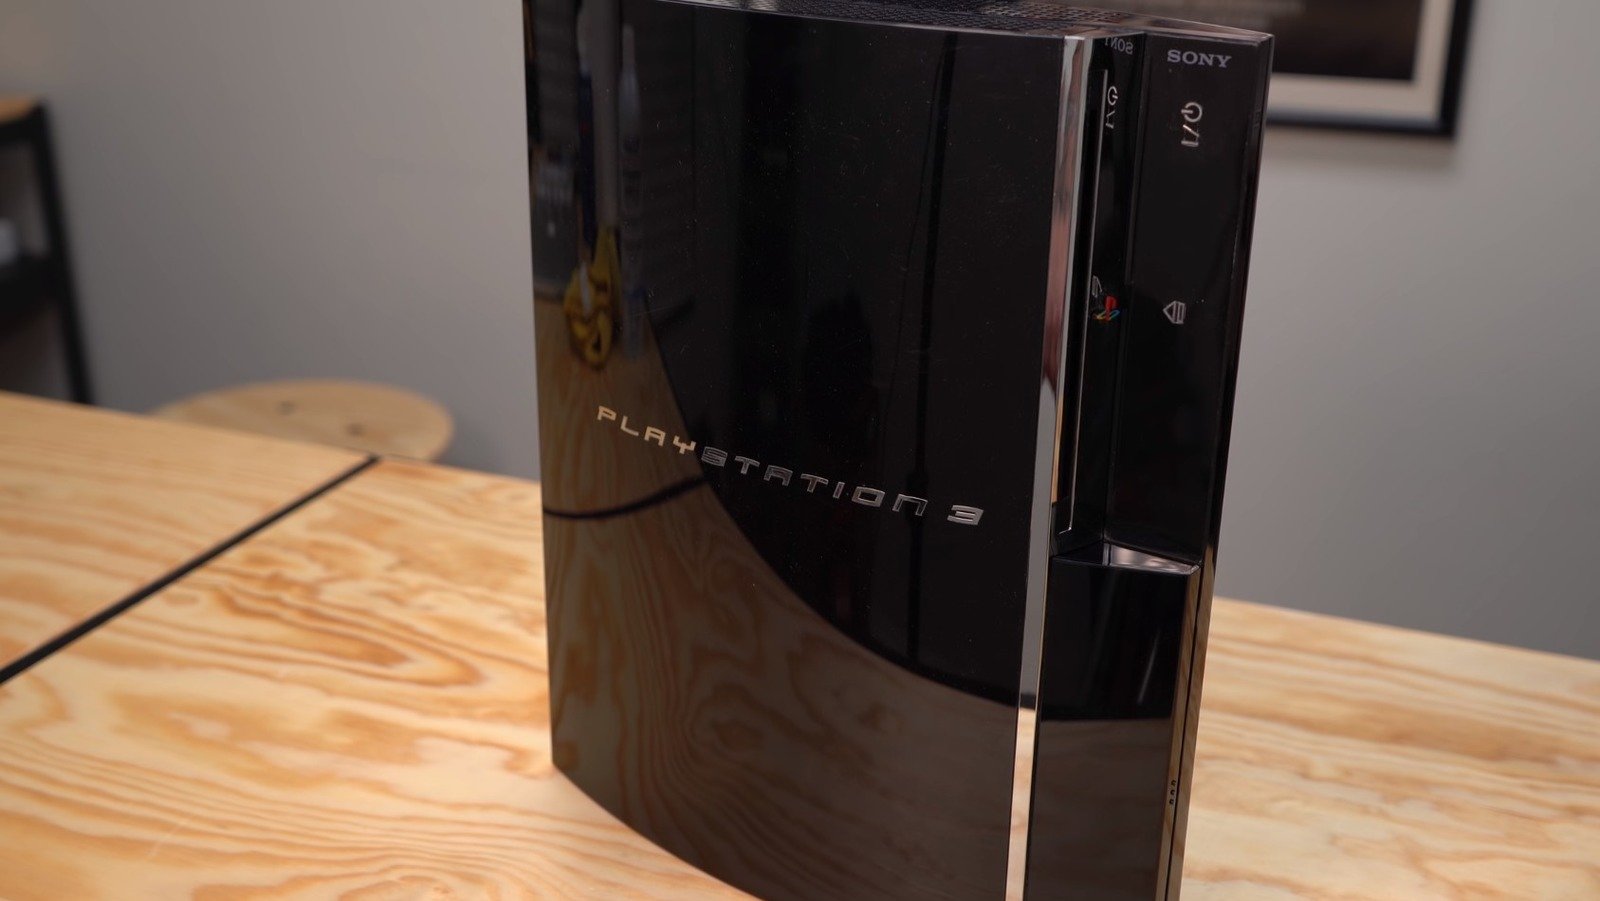 Why The PlayStation 3 Reveal Ended Up Being A Big Flop